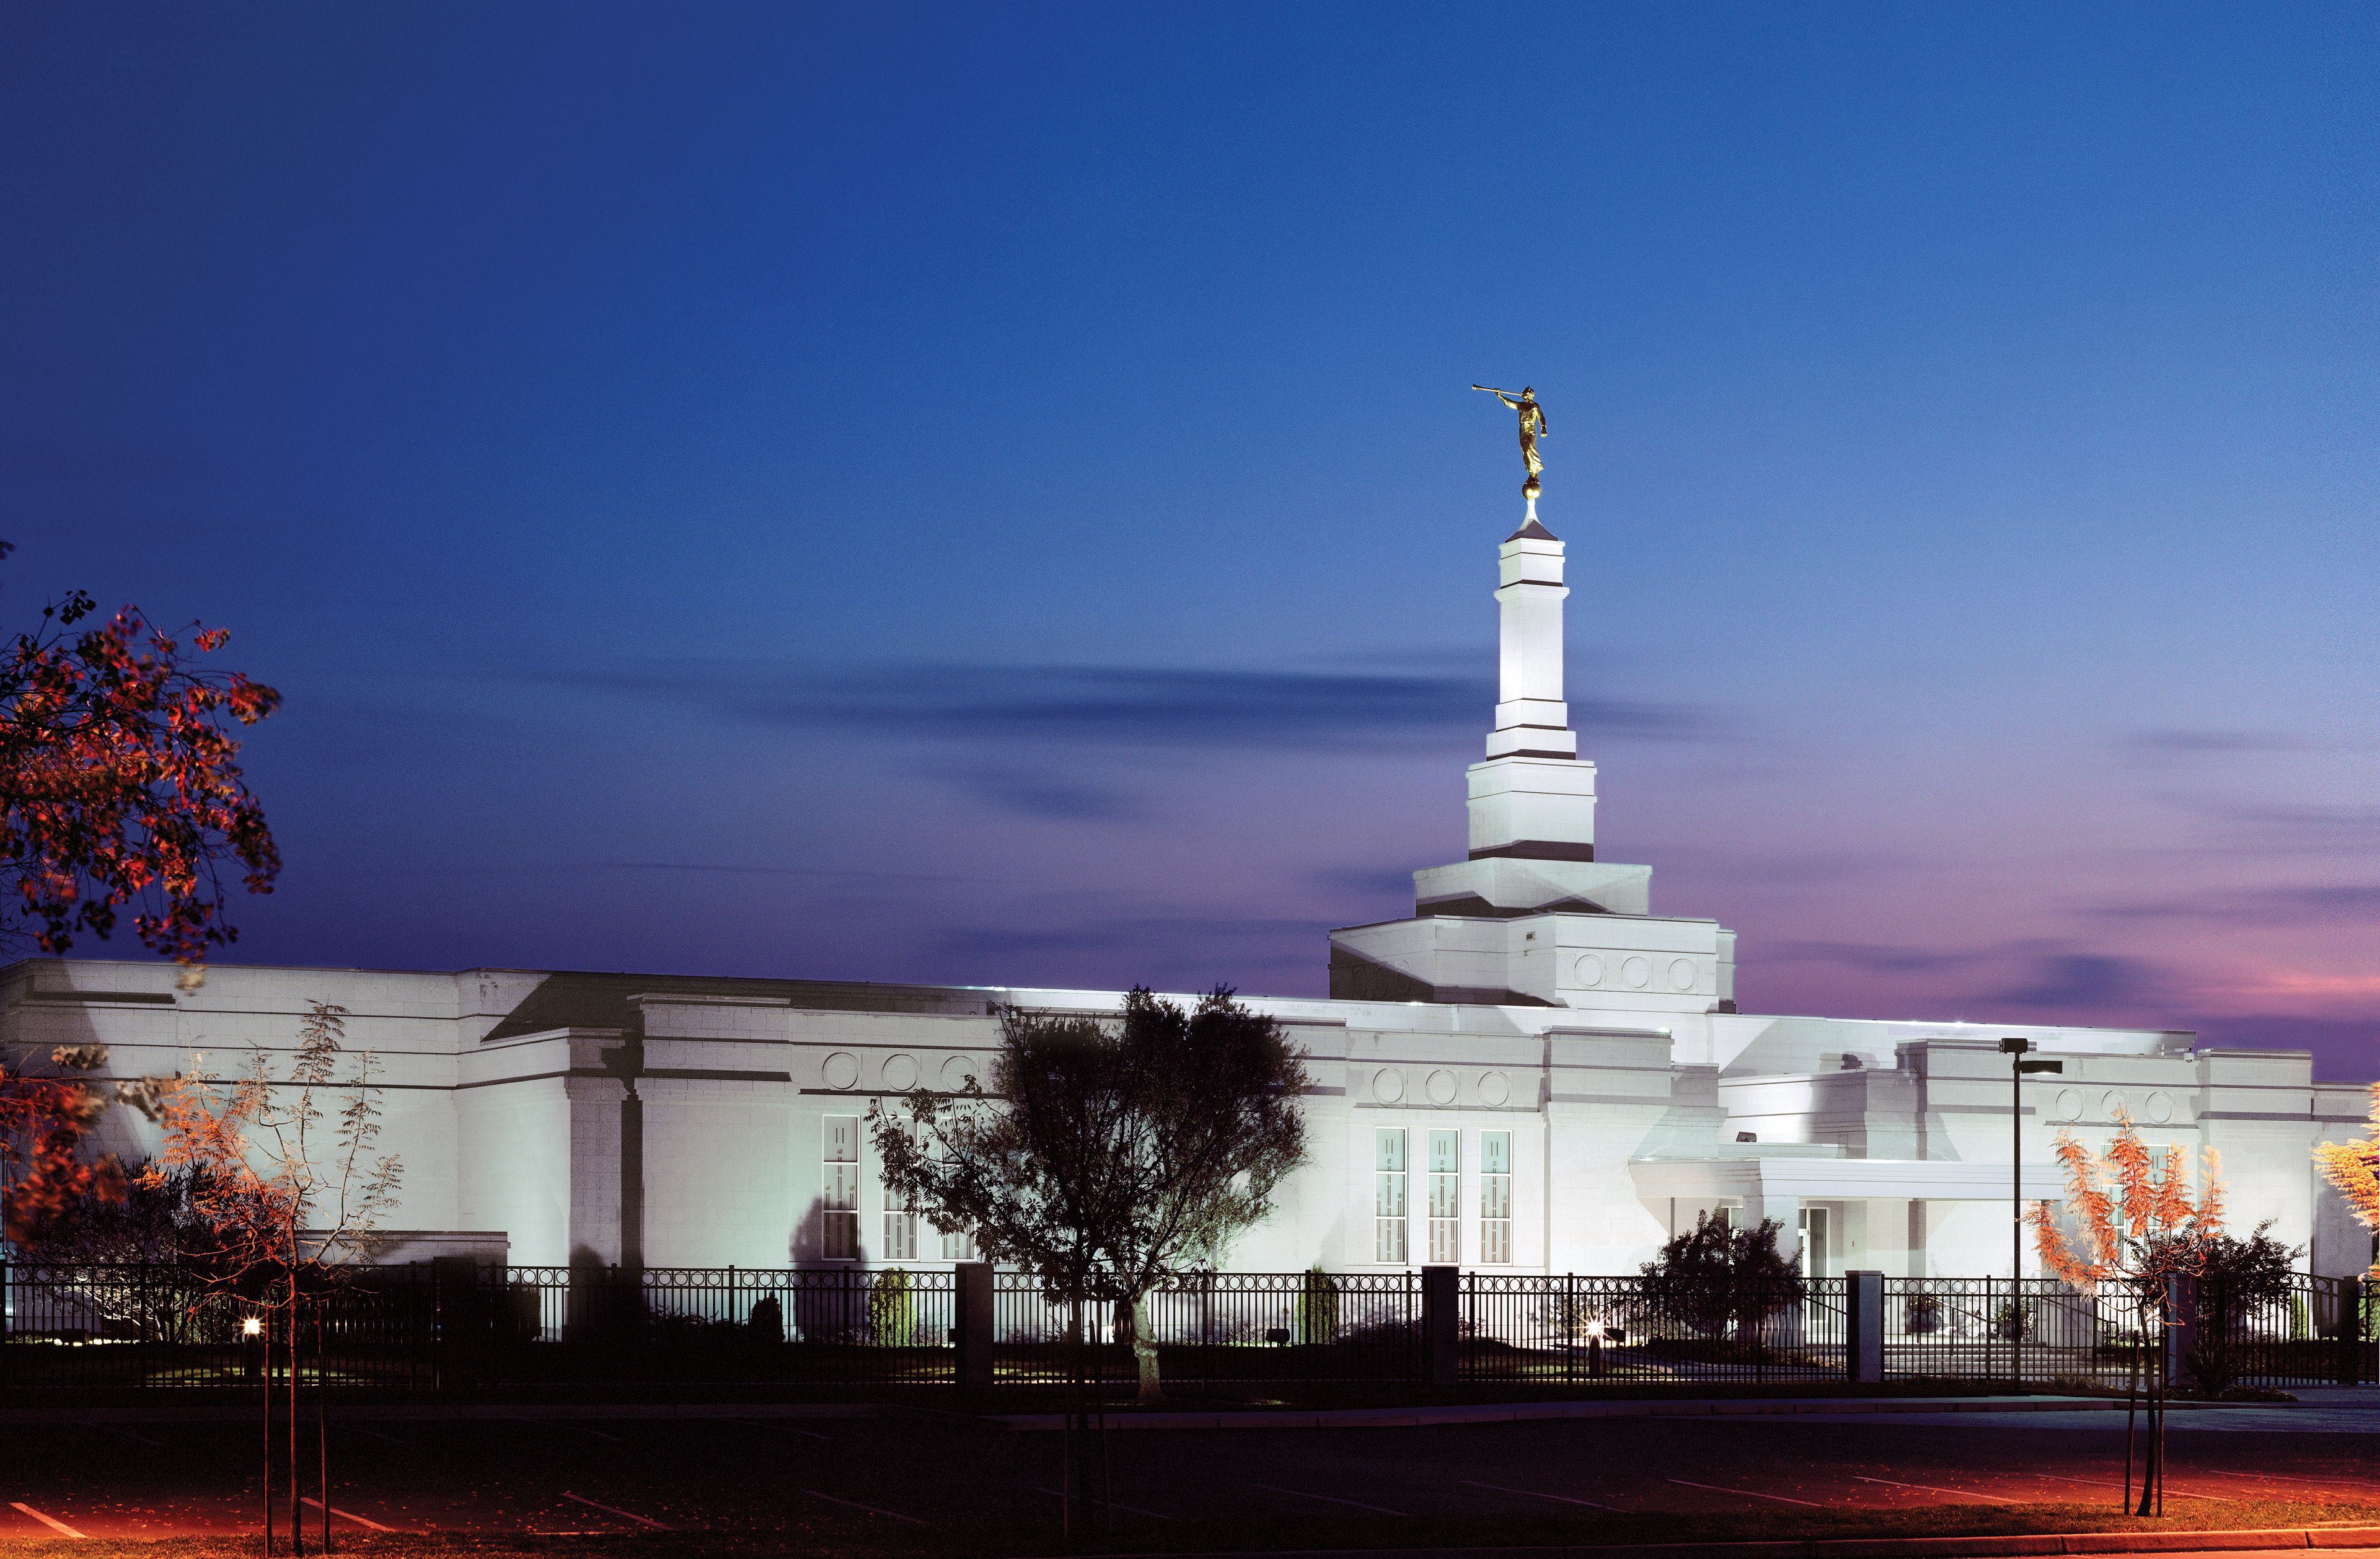 The Fresno California Temple lit up at night.